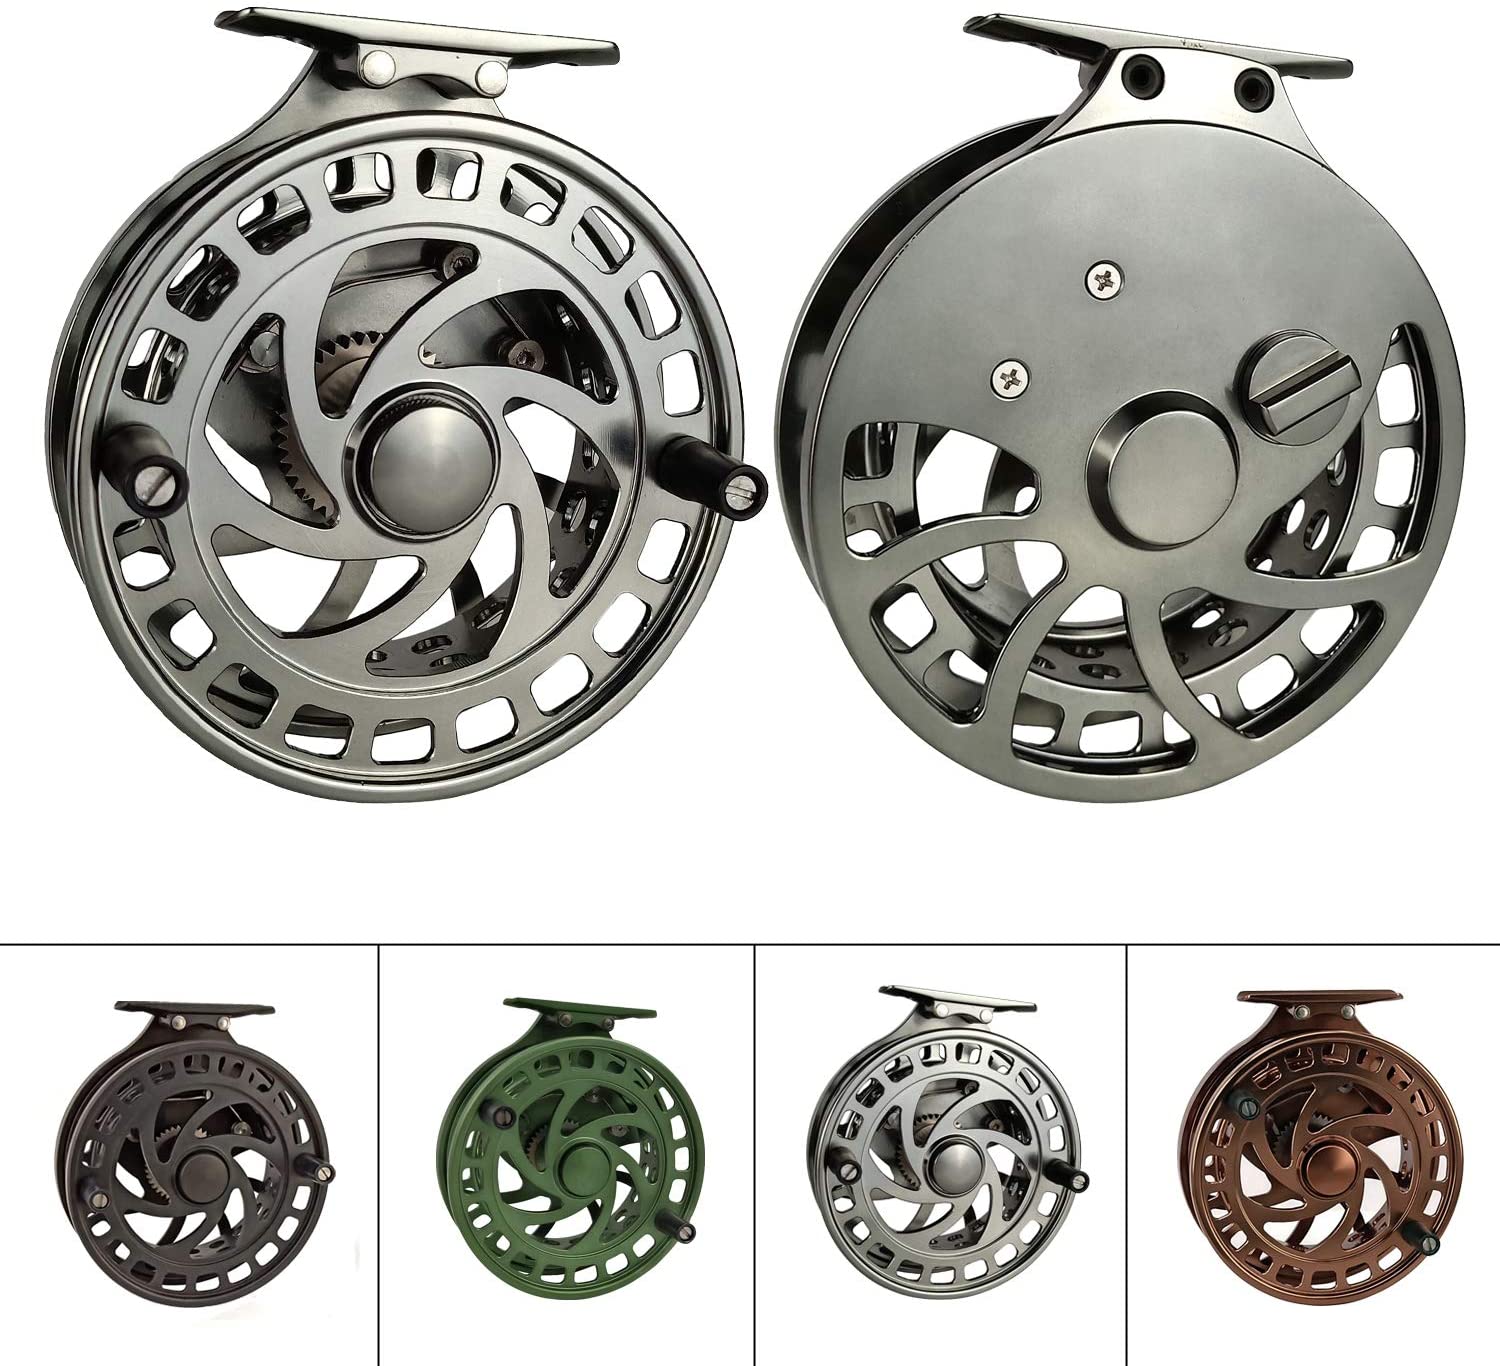 Aventik Troutscale Fly Reel 5/7wt Super Large Arbor Fly Fishing Reel Fresh  Water and Salt Water Aluminum Fly Reel